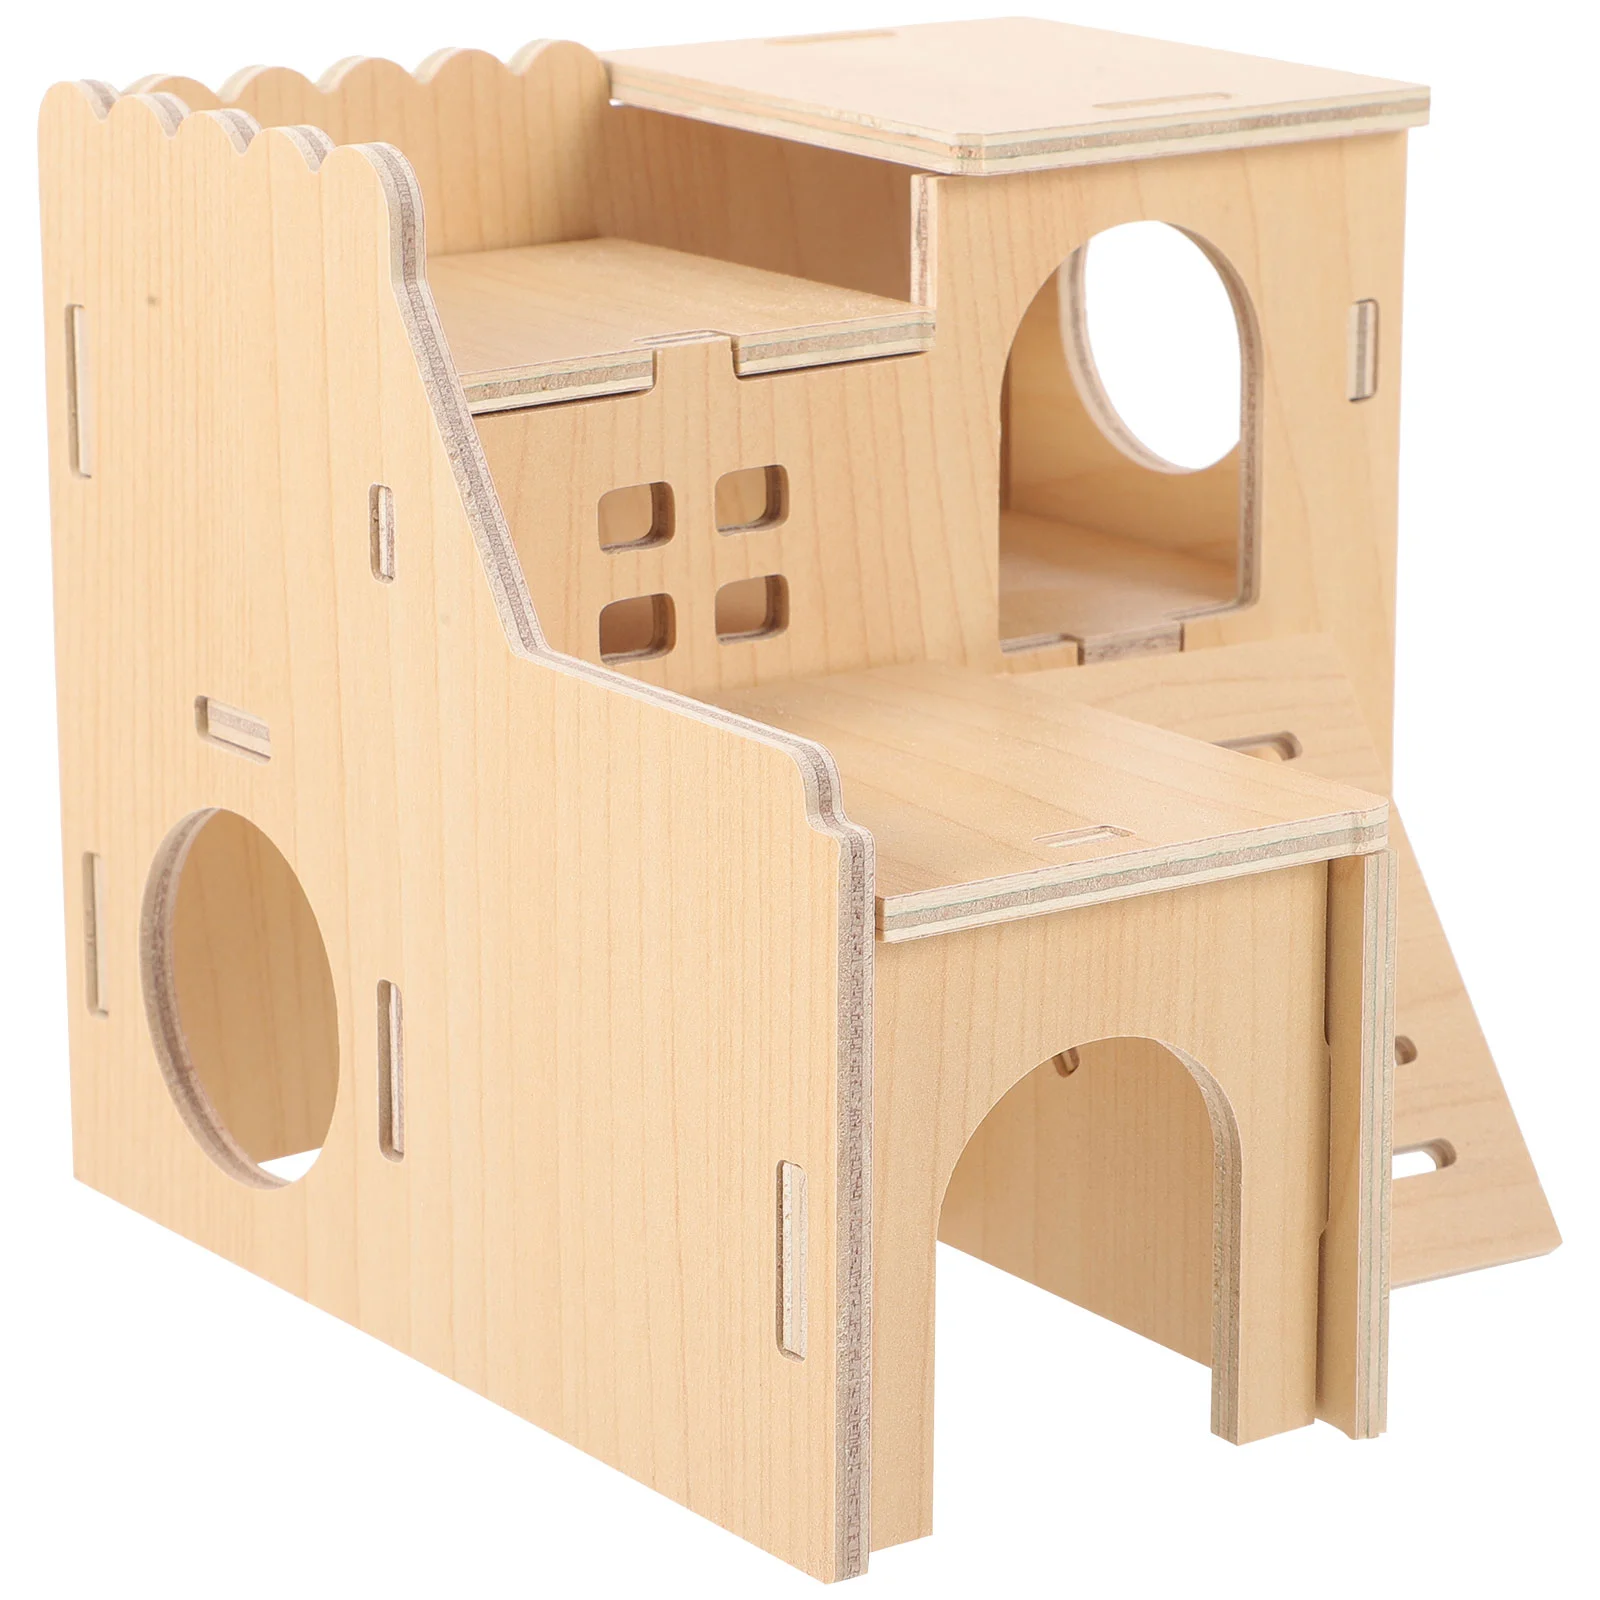 

Rat Guinea Pigs Hamster Hideout Hamster Platform Tiny House Rat House Hamster Hut for Decor Rat Cage Small Animals